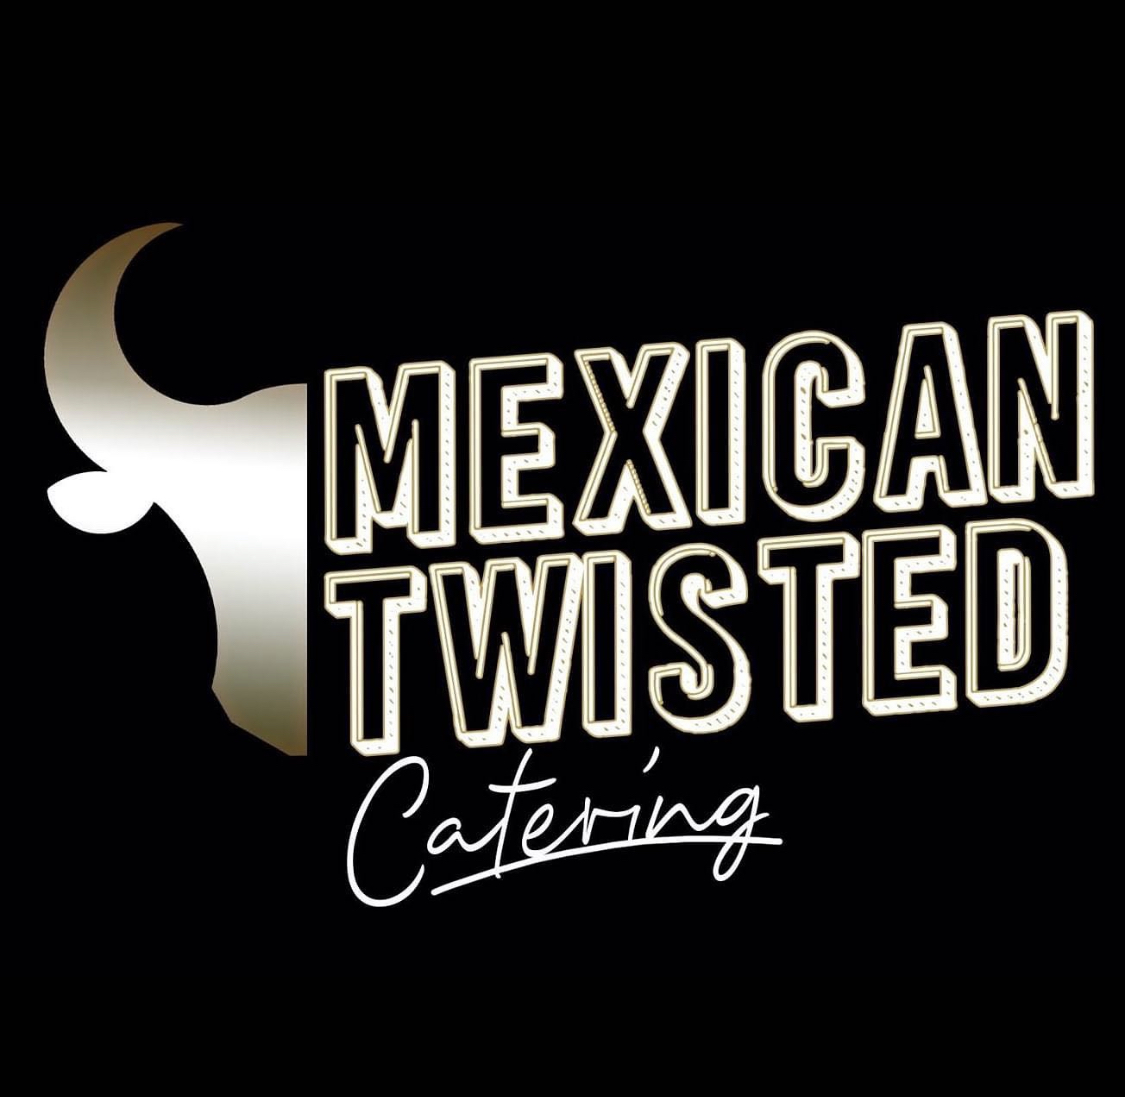 Mexican Twisted